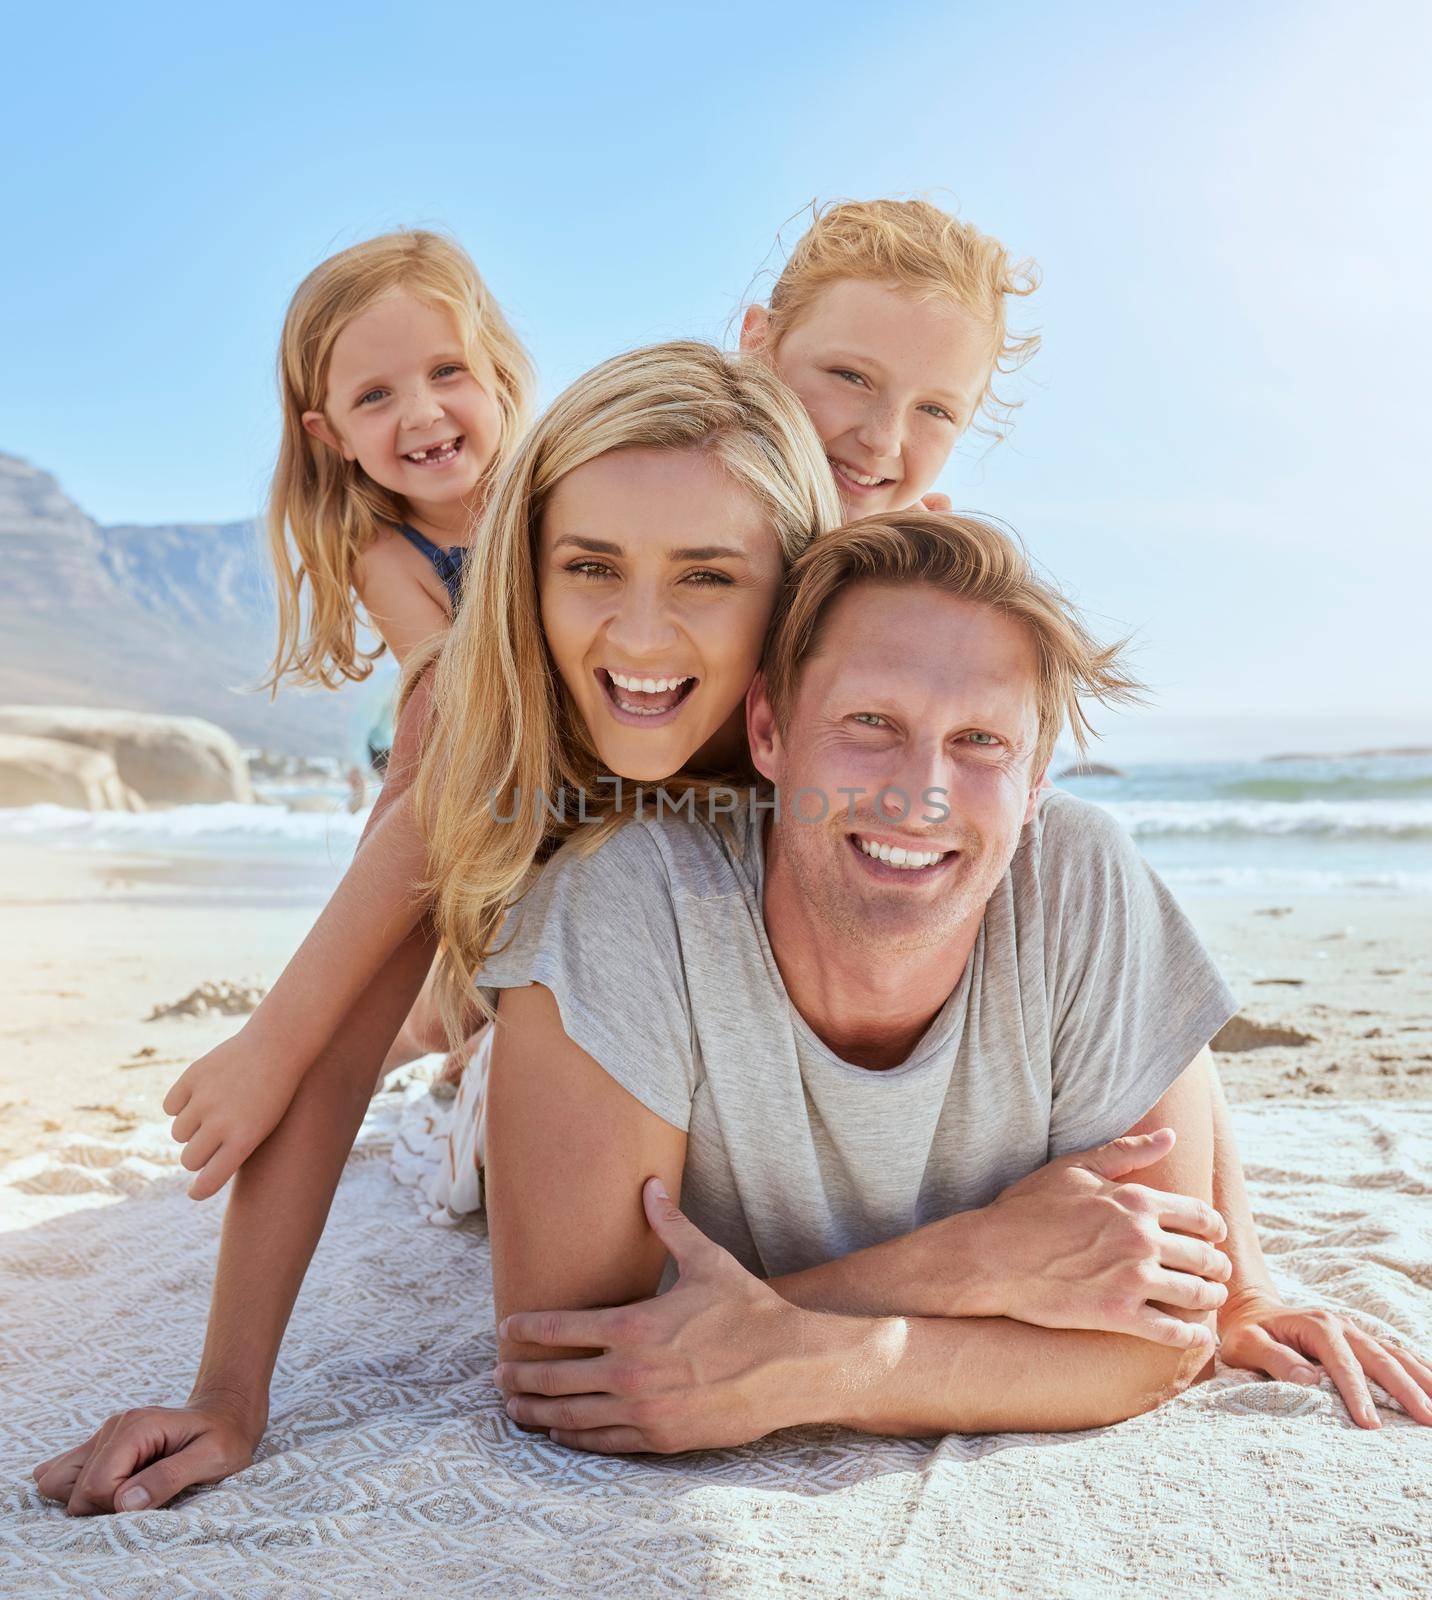 Portrait of a carefree family relaxing and bonding on the beach. Two cheerful little girls having fun with their parents on holiday. Mom and two daughters lying on top of dad enjoying vacation.